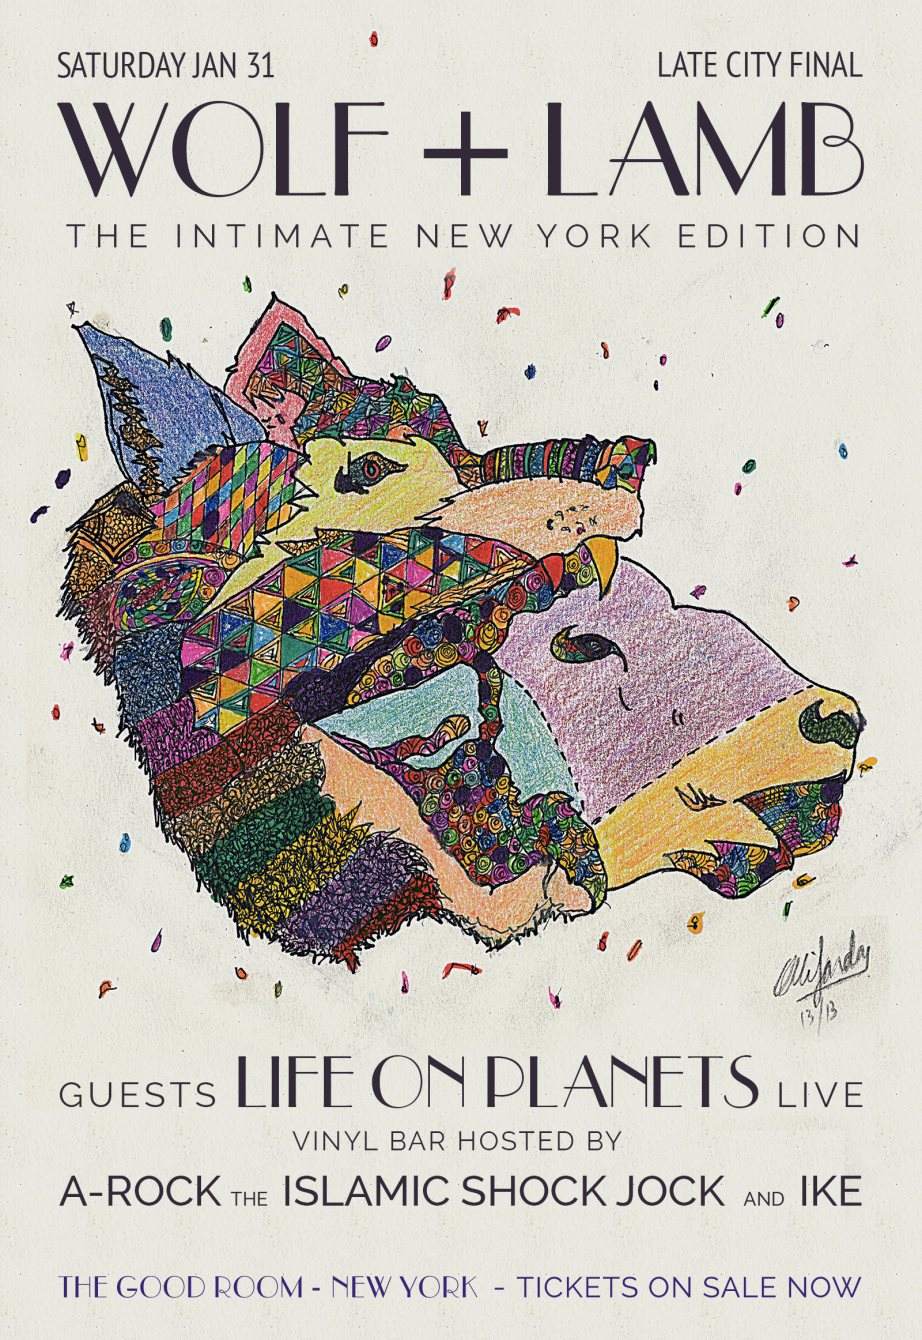 Wolf+Lamb and Life on Planets - The Intimate NYC Edition - Página frontal